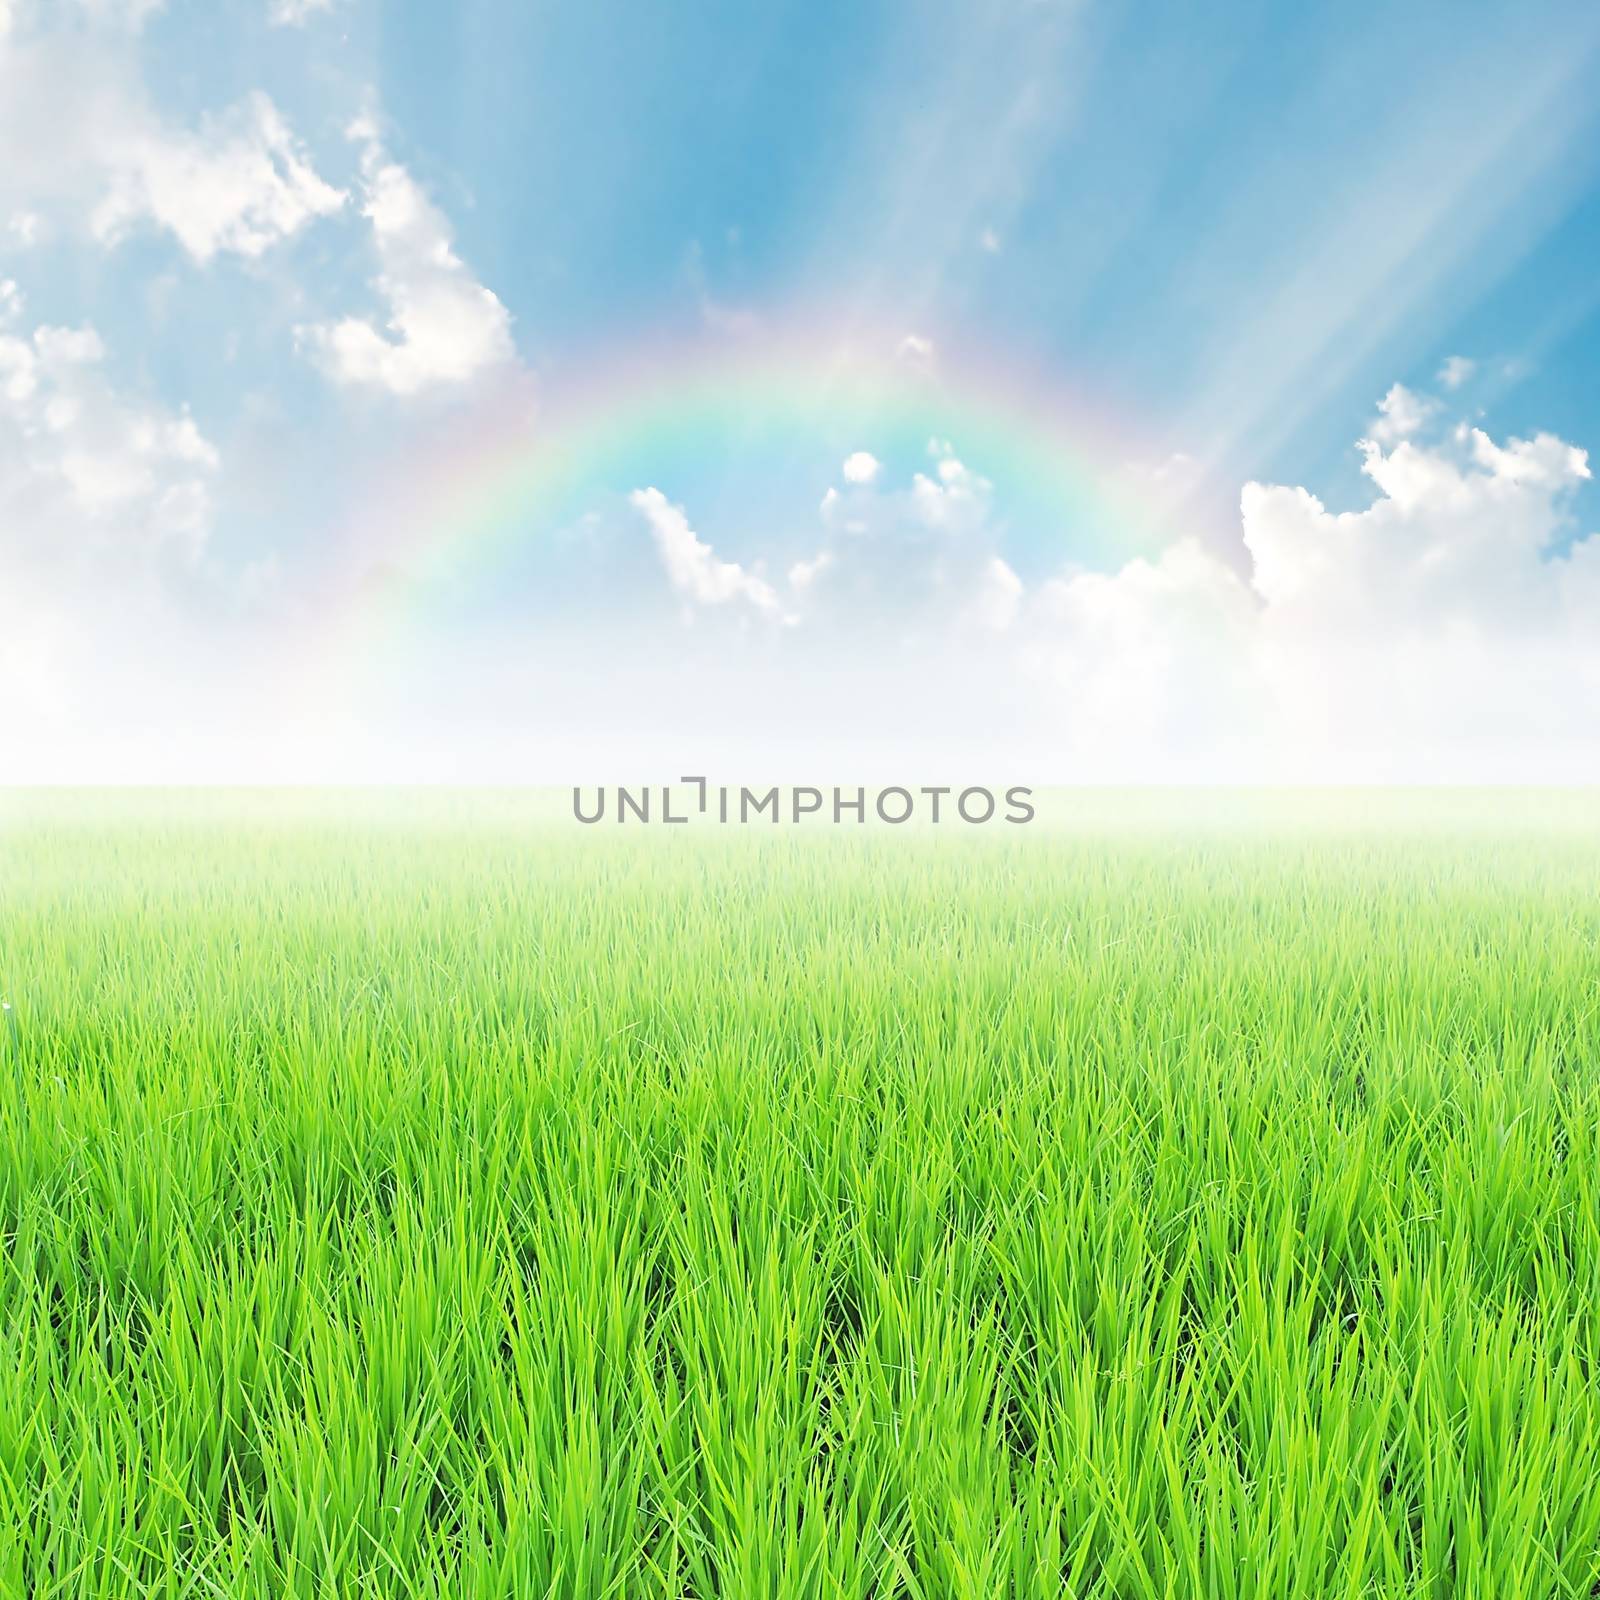 field on a background of the blue sky with rainbow